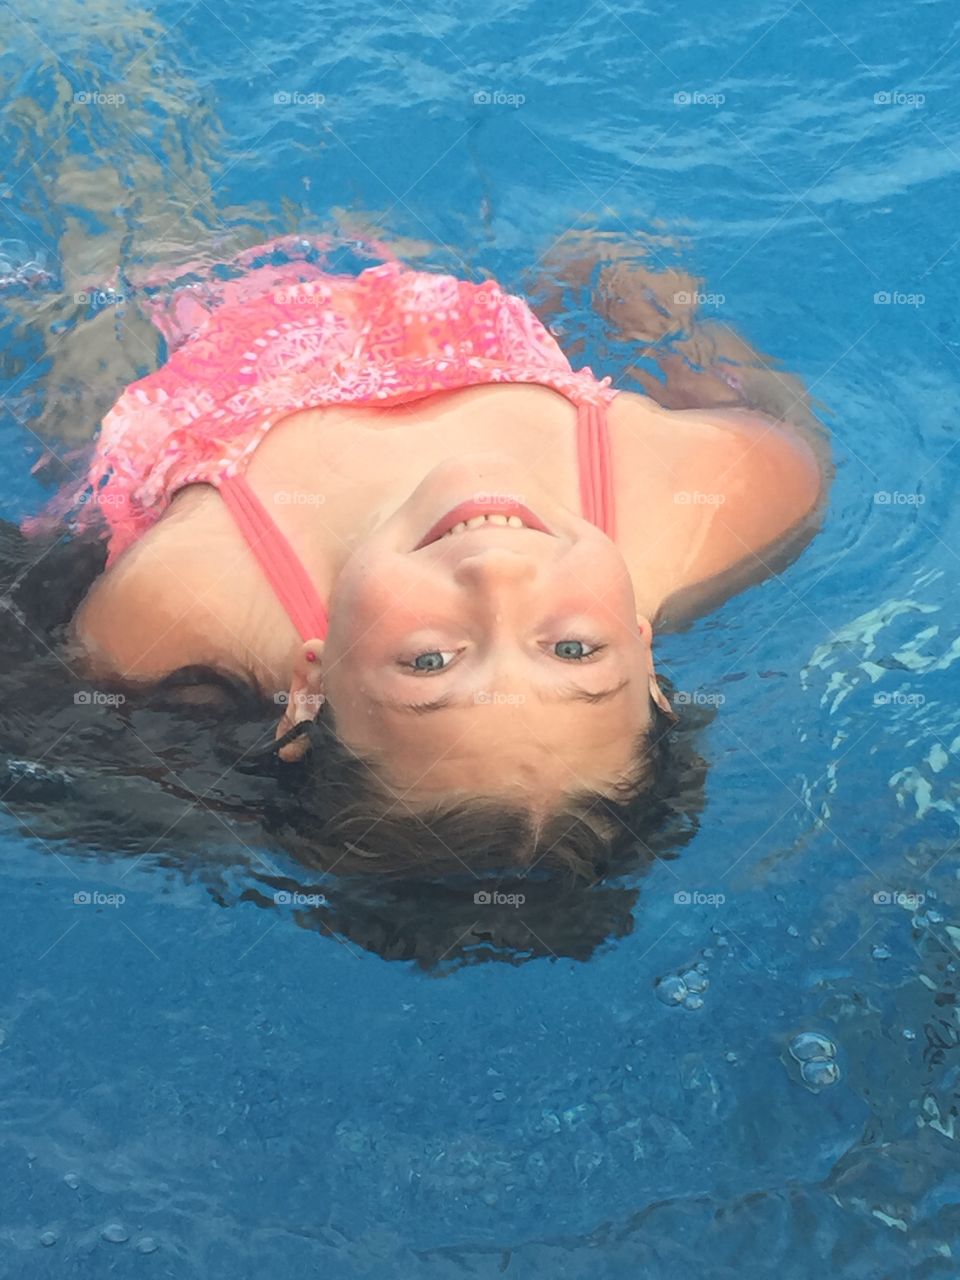 Portrait of a girl swimming in pool